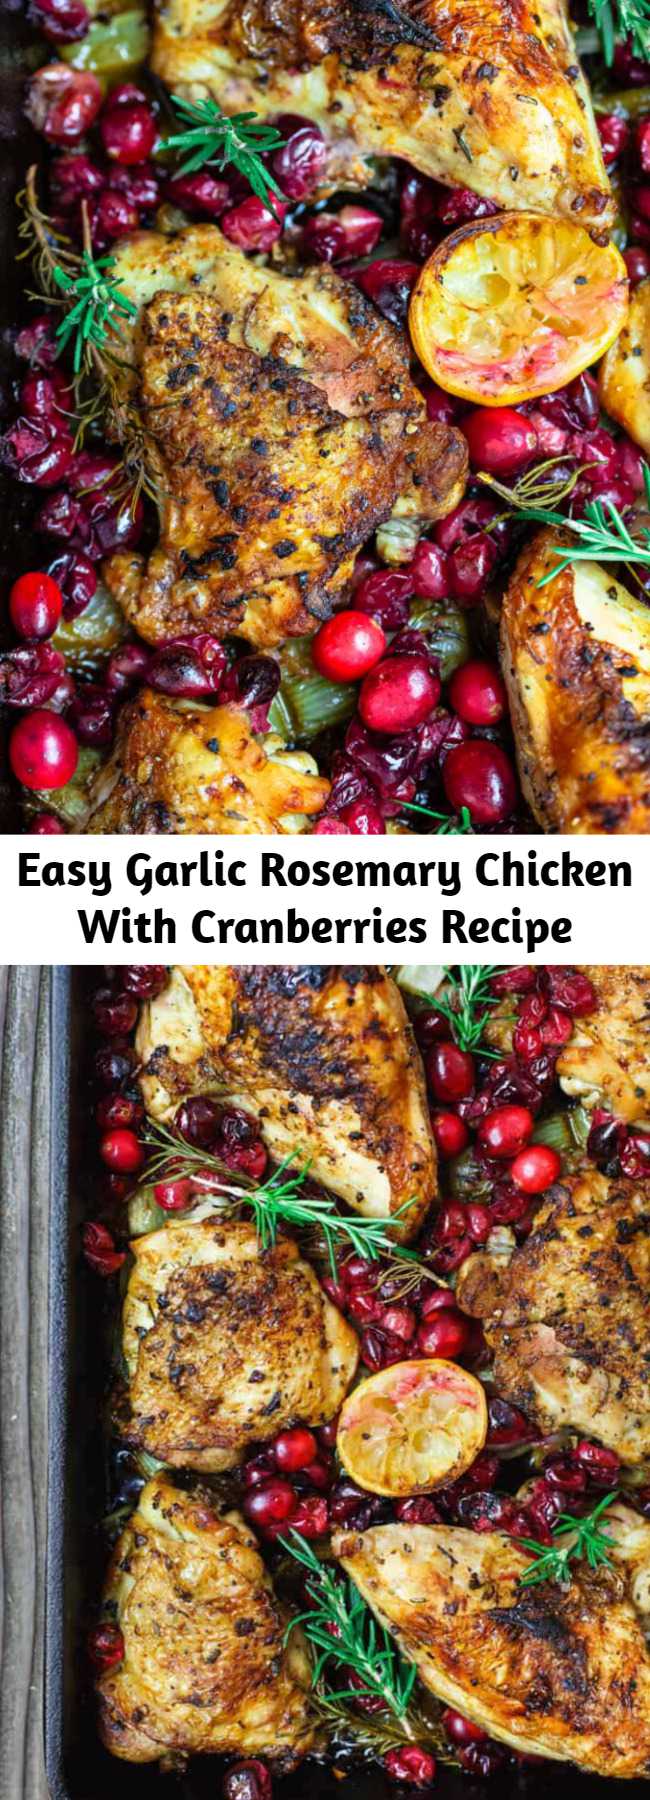 Easy Garlic Rosemary Chicken With Cranberries Recipe - This easy baked cranberry chicken recipe with rosemary is your ticket to a comforting, show-stopping dinner! You'll love the bold flavors from fresh minced garlic, rosemary, and citrus. Fresh cranberries make a festive, luscious and juicy topping. #chicken #christmasdinner #holidaydinner #bakedchicken #roastedchicken #cranberries #cranberry #cranberryrecipes #glutenfreerecipes #roastchicken #bakedchicken #cranberrychicken